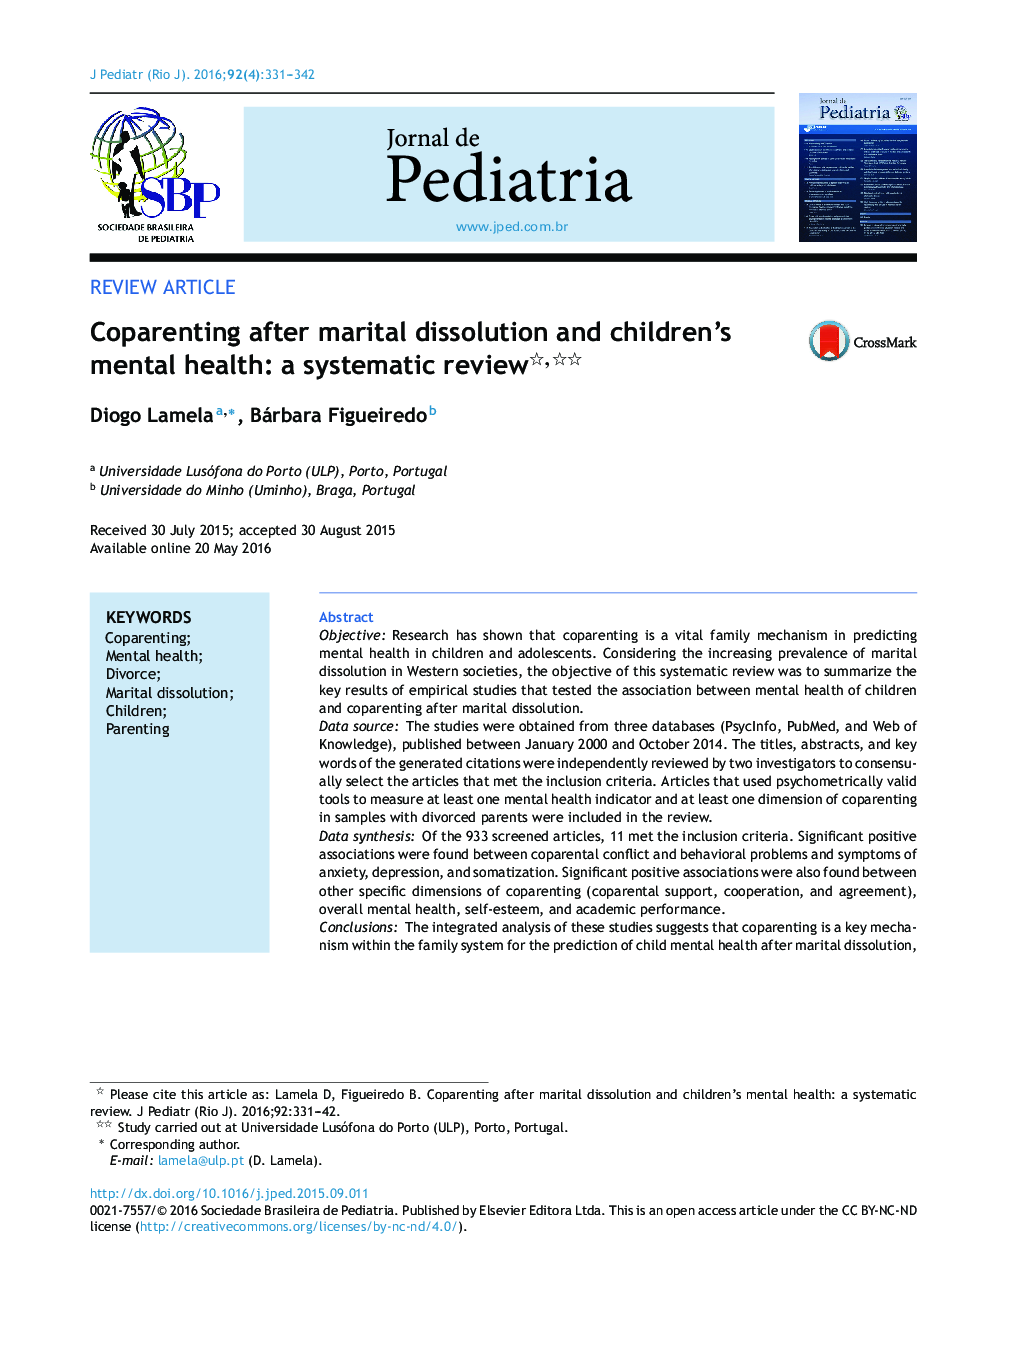 Coparenting after marital dissolution and children's mental health: a systematic review 